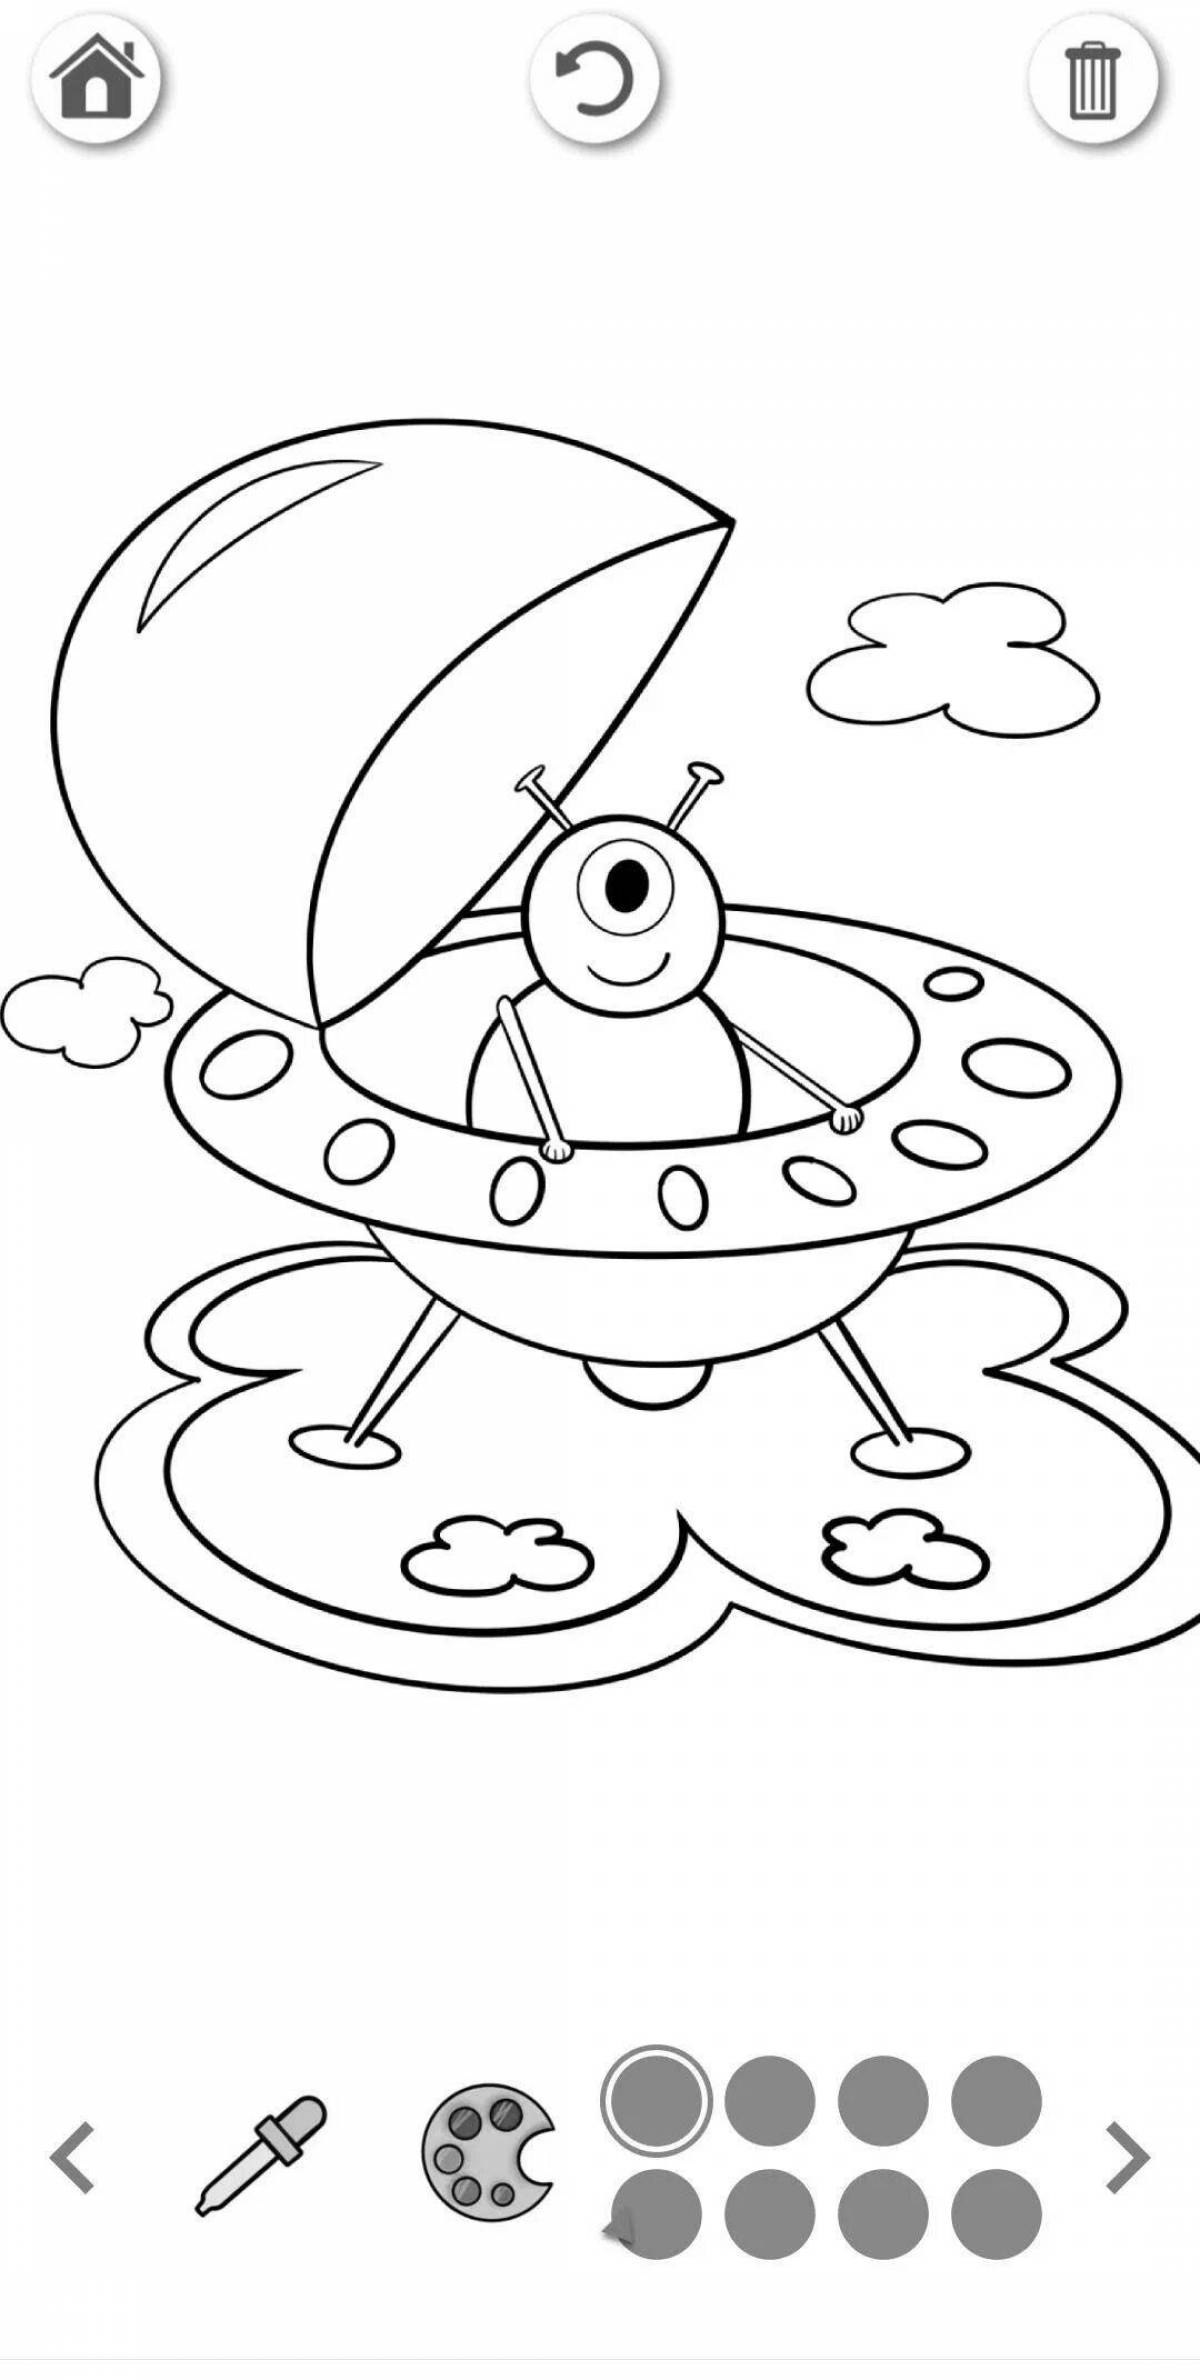 Amazing space game coloring page